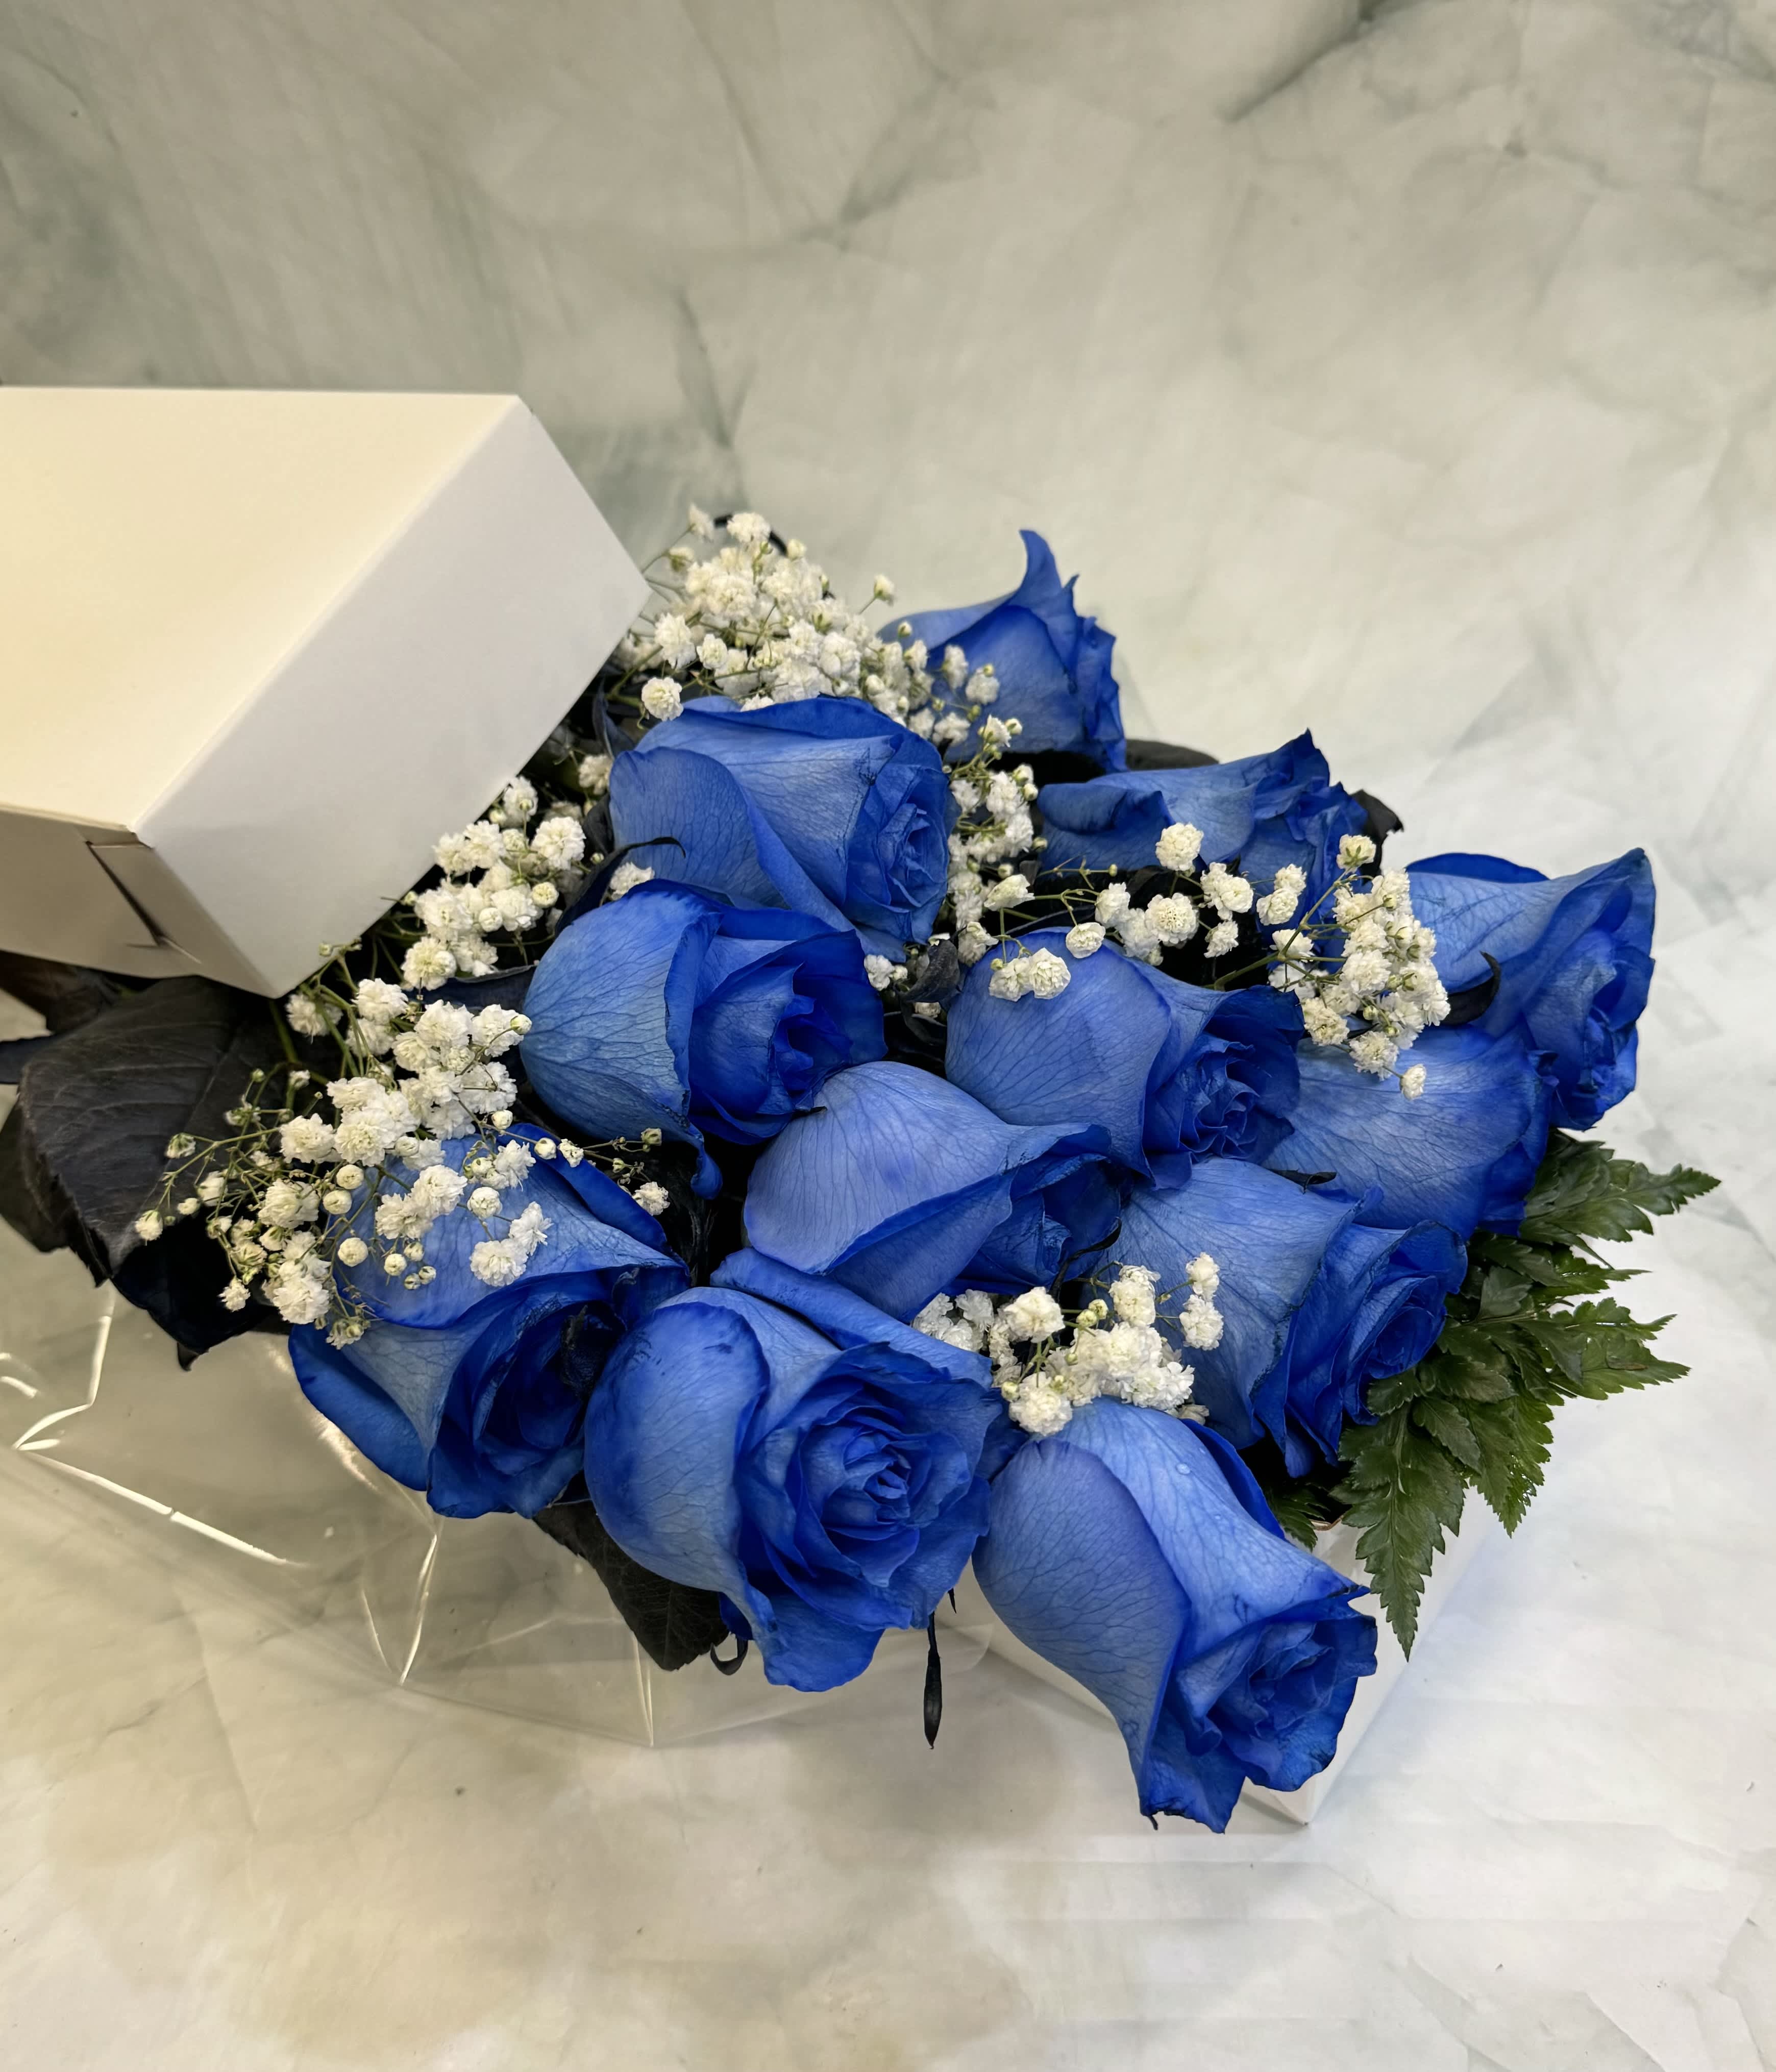 Dozen Blue Roses Gift Boxed  - This is a beautiful way to present blue Roses. This is a gorgeous display of one dozen blue Roses that are arranged in a white, long gift box that is then all wrapped up with a bow. 